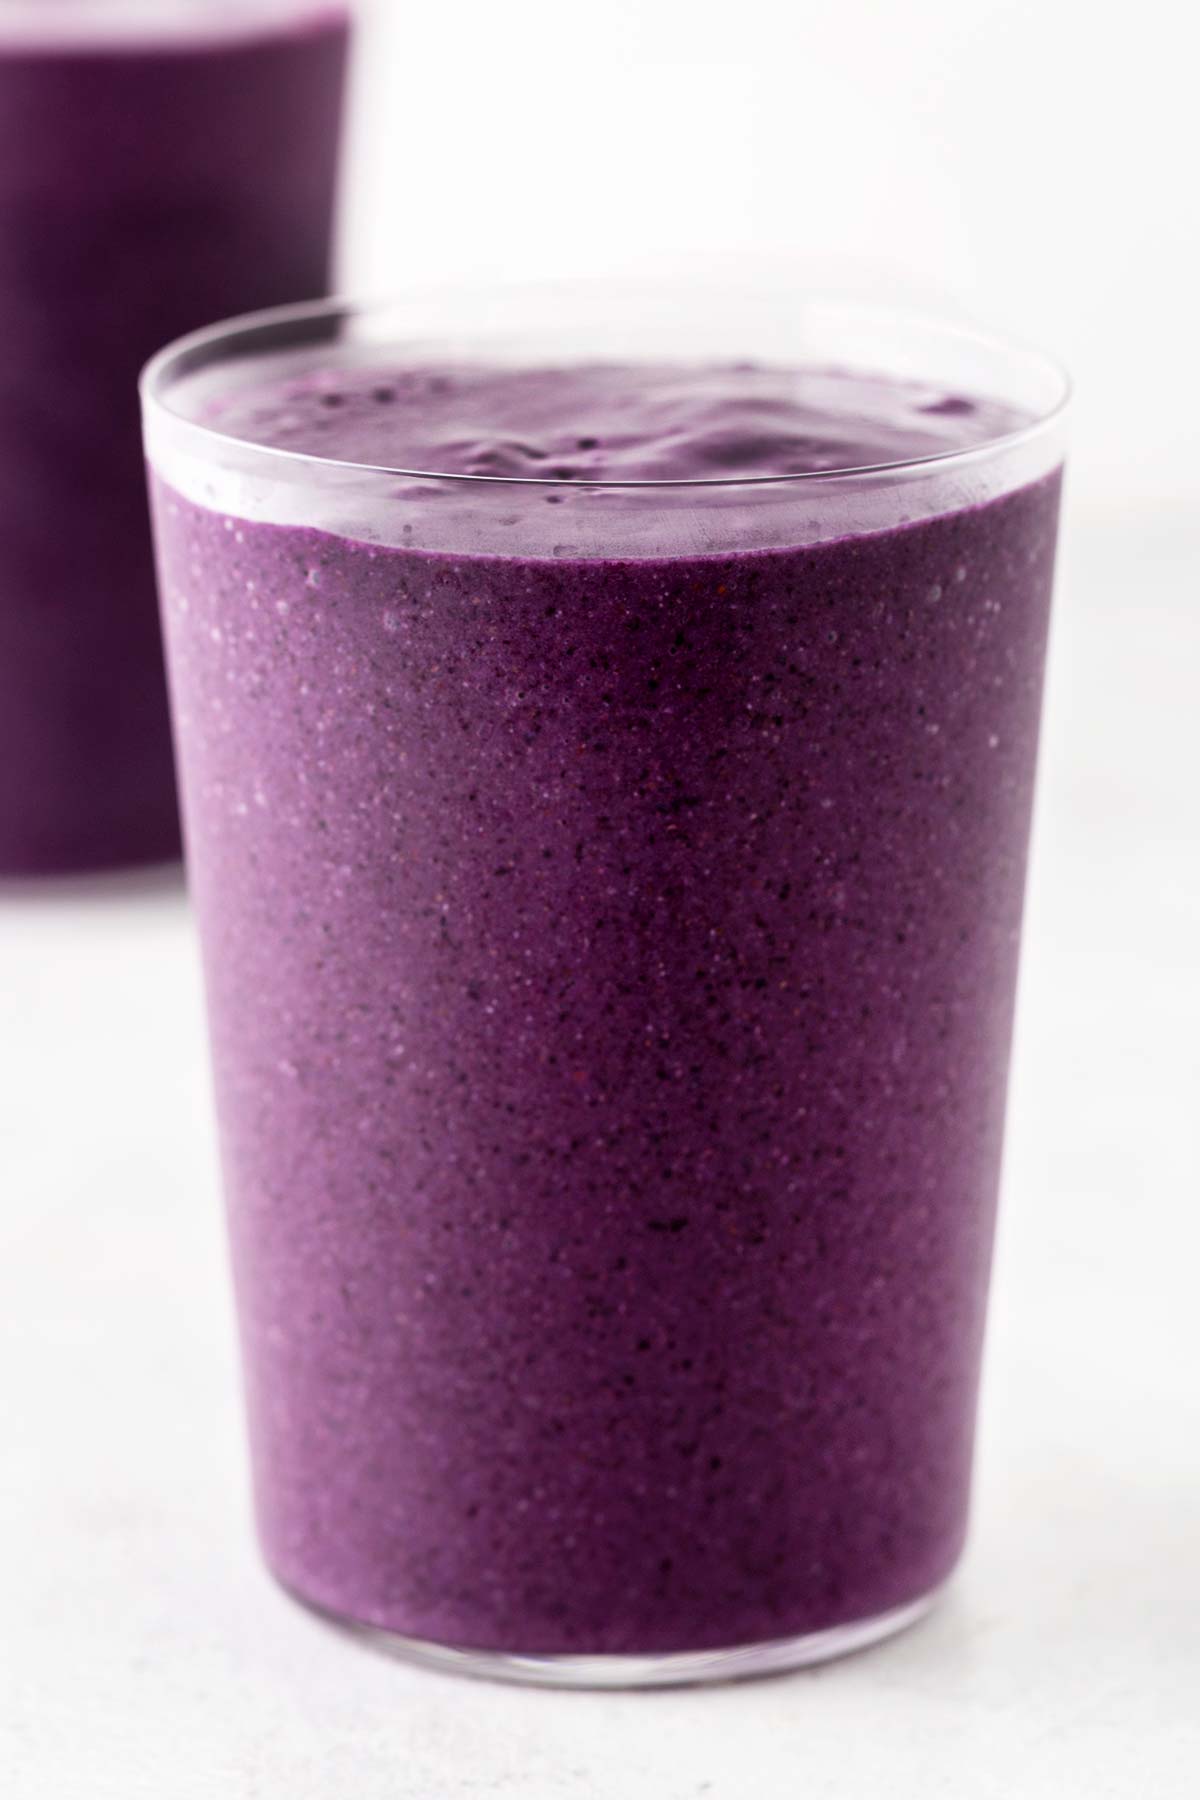 Purple sweet potato smoothie in a glass.